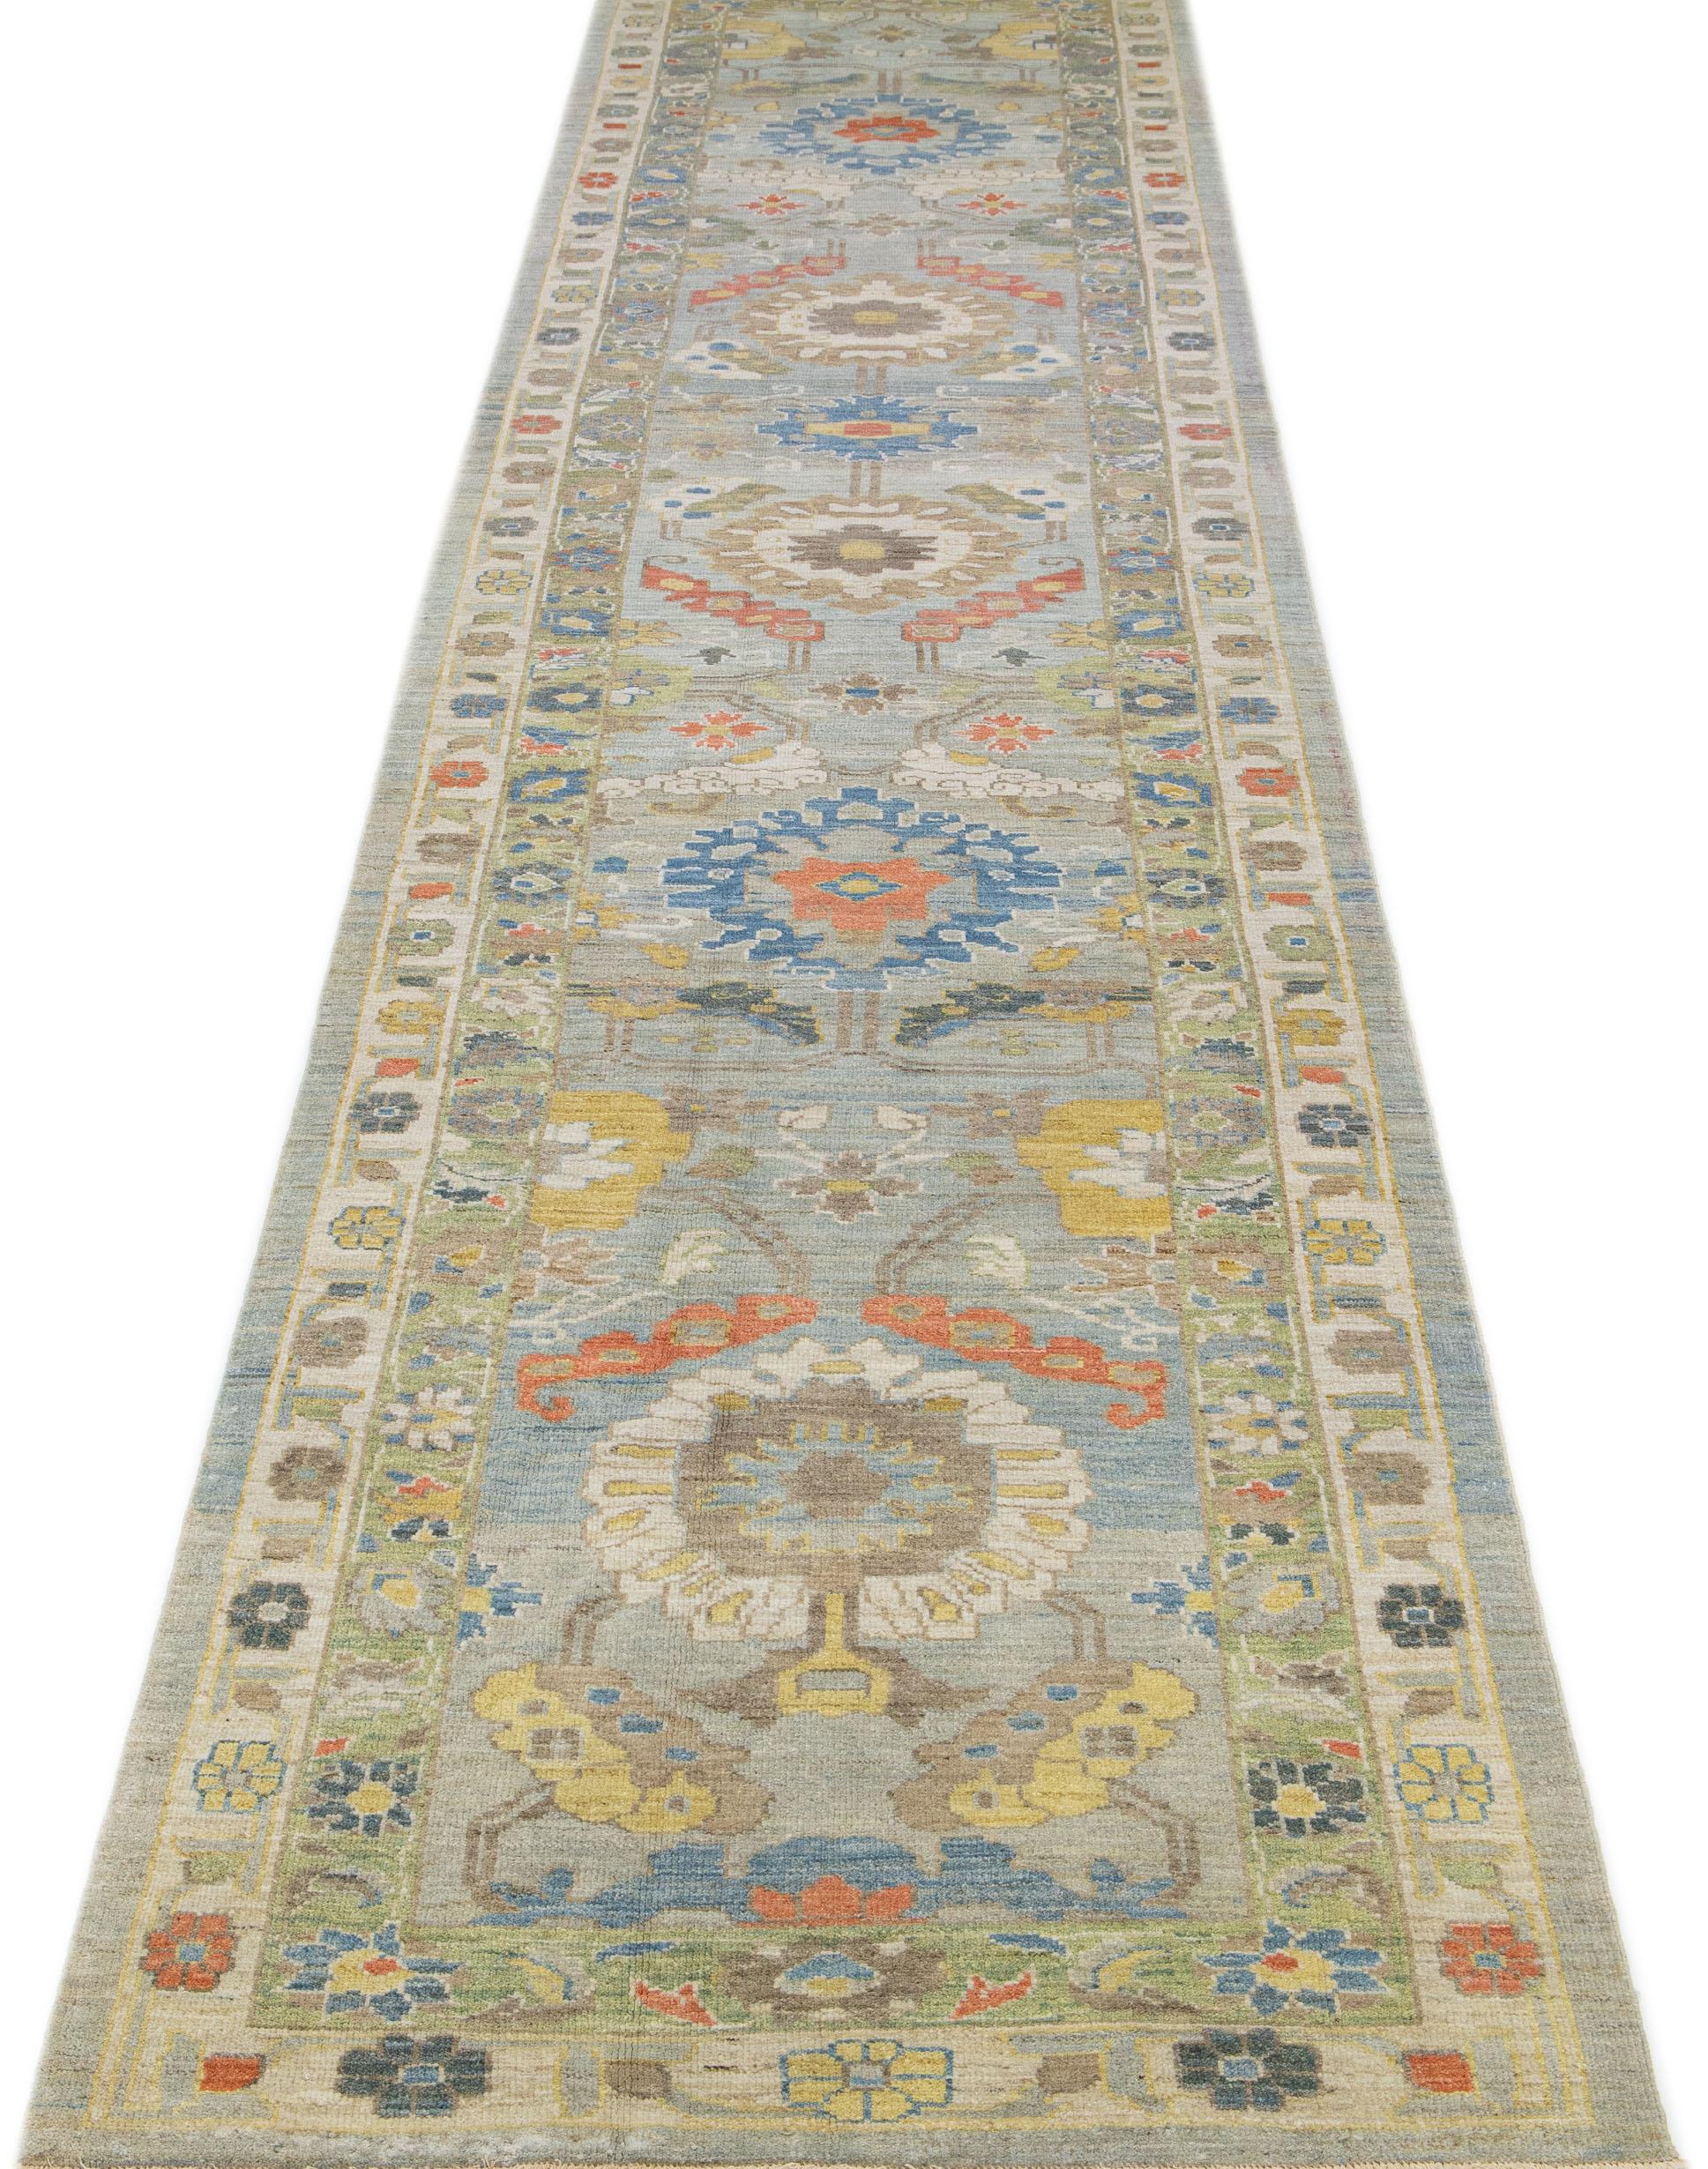 This contemporary take on the traditional Sultanabad style is showcased in an exquisite hand-knotted wool rug with a striking light blue color. An intricately designed beige and green frame accentuates its all-over floral motif, adorned with